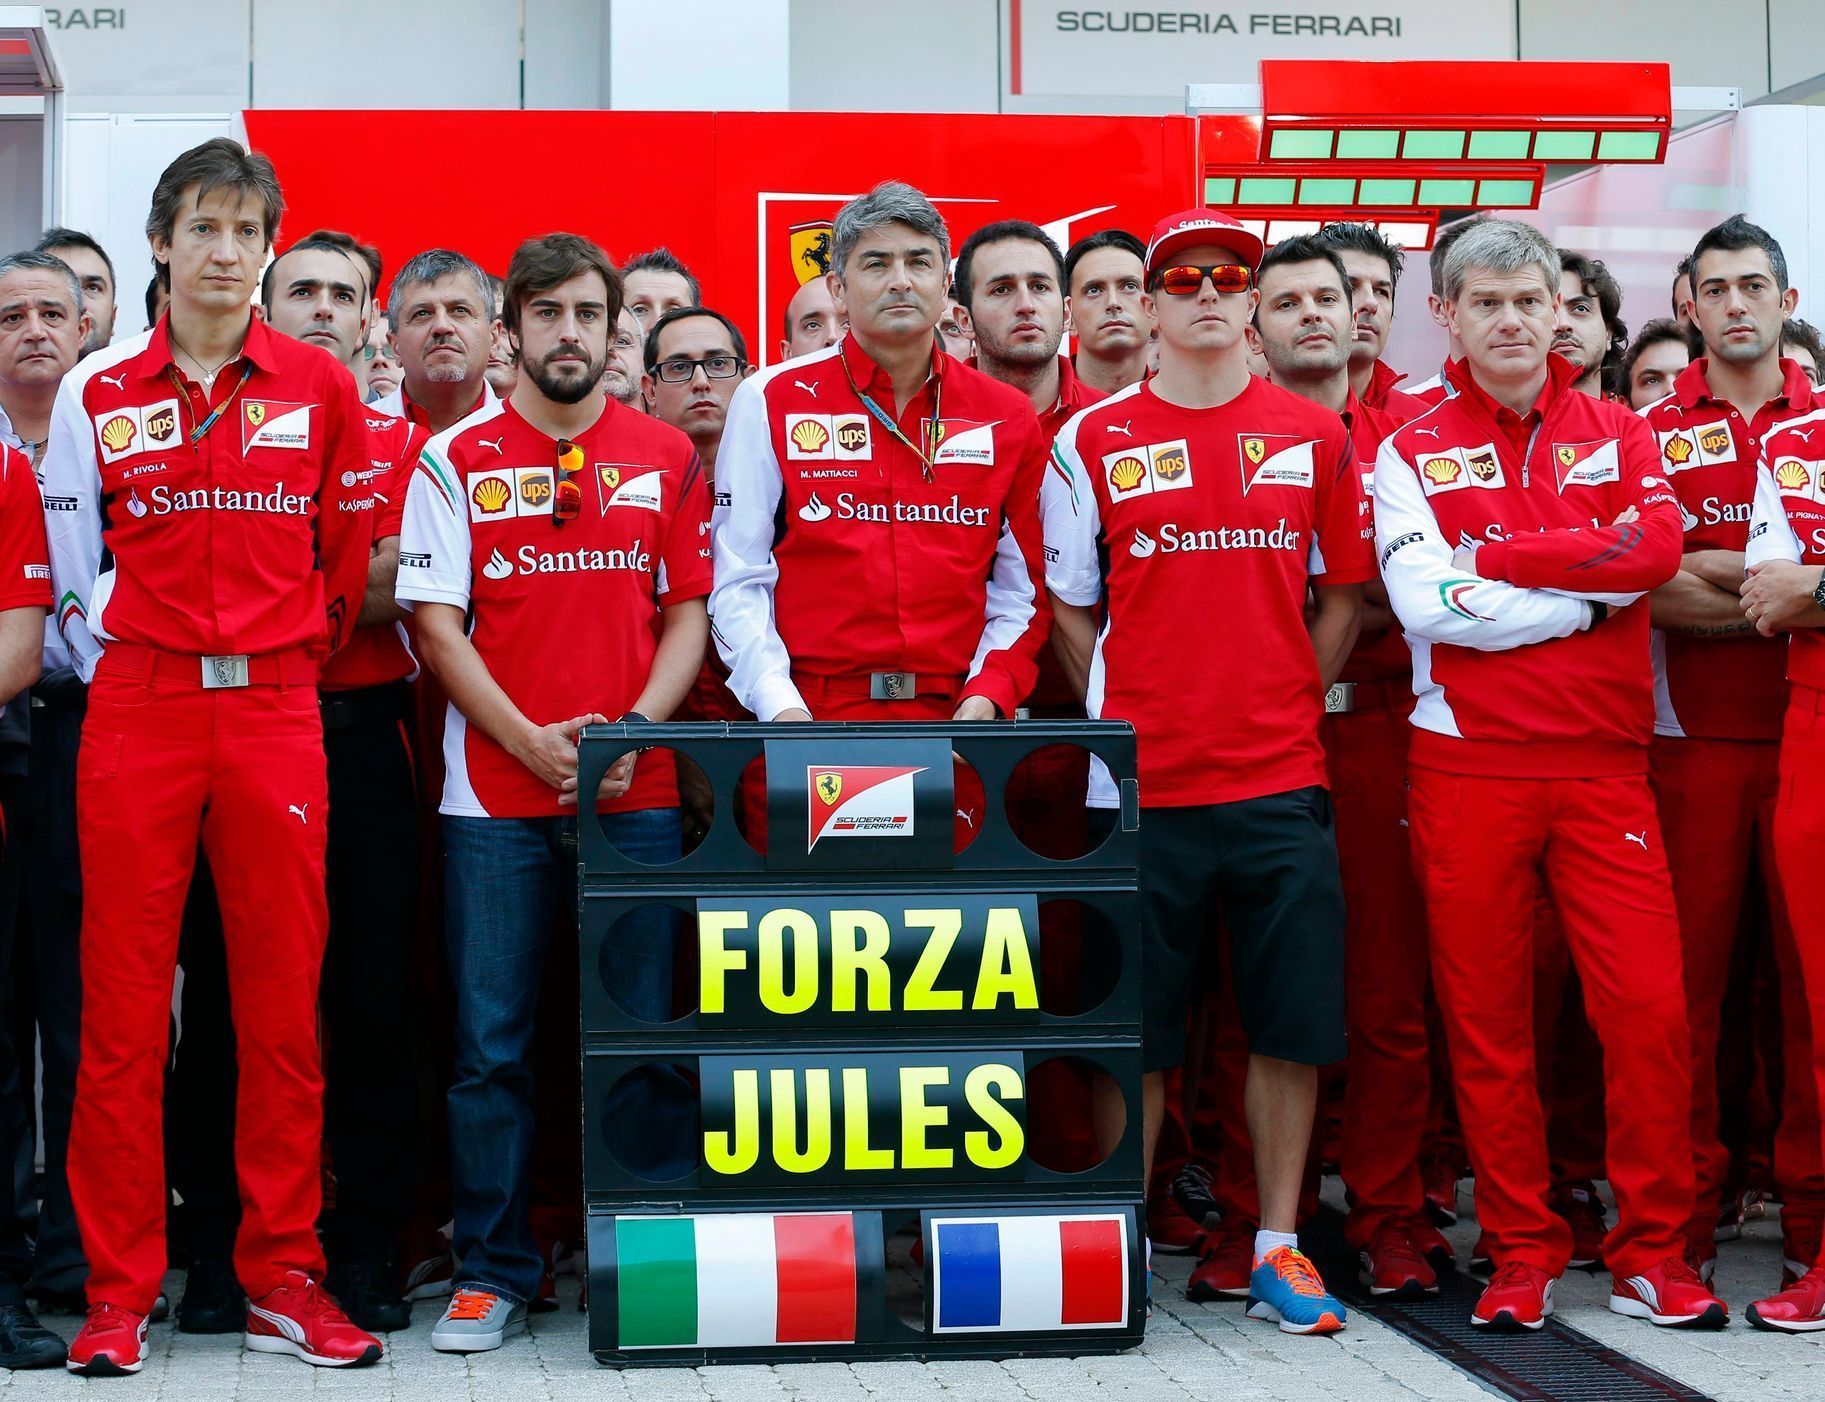 Members of Ferrari Formula One team pose with a sign in support of Marussia Formula One driver Bianchi of France before the first Russian Grand Prix in Sochi